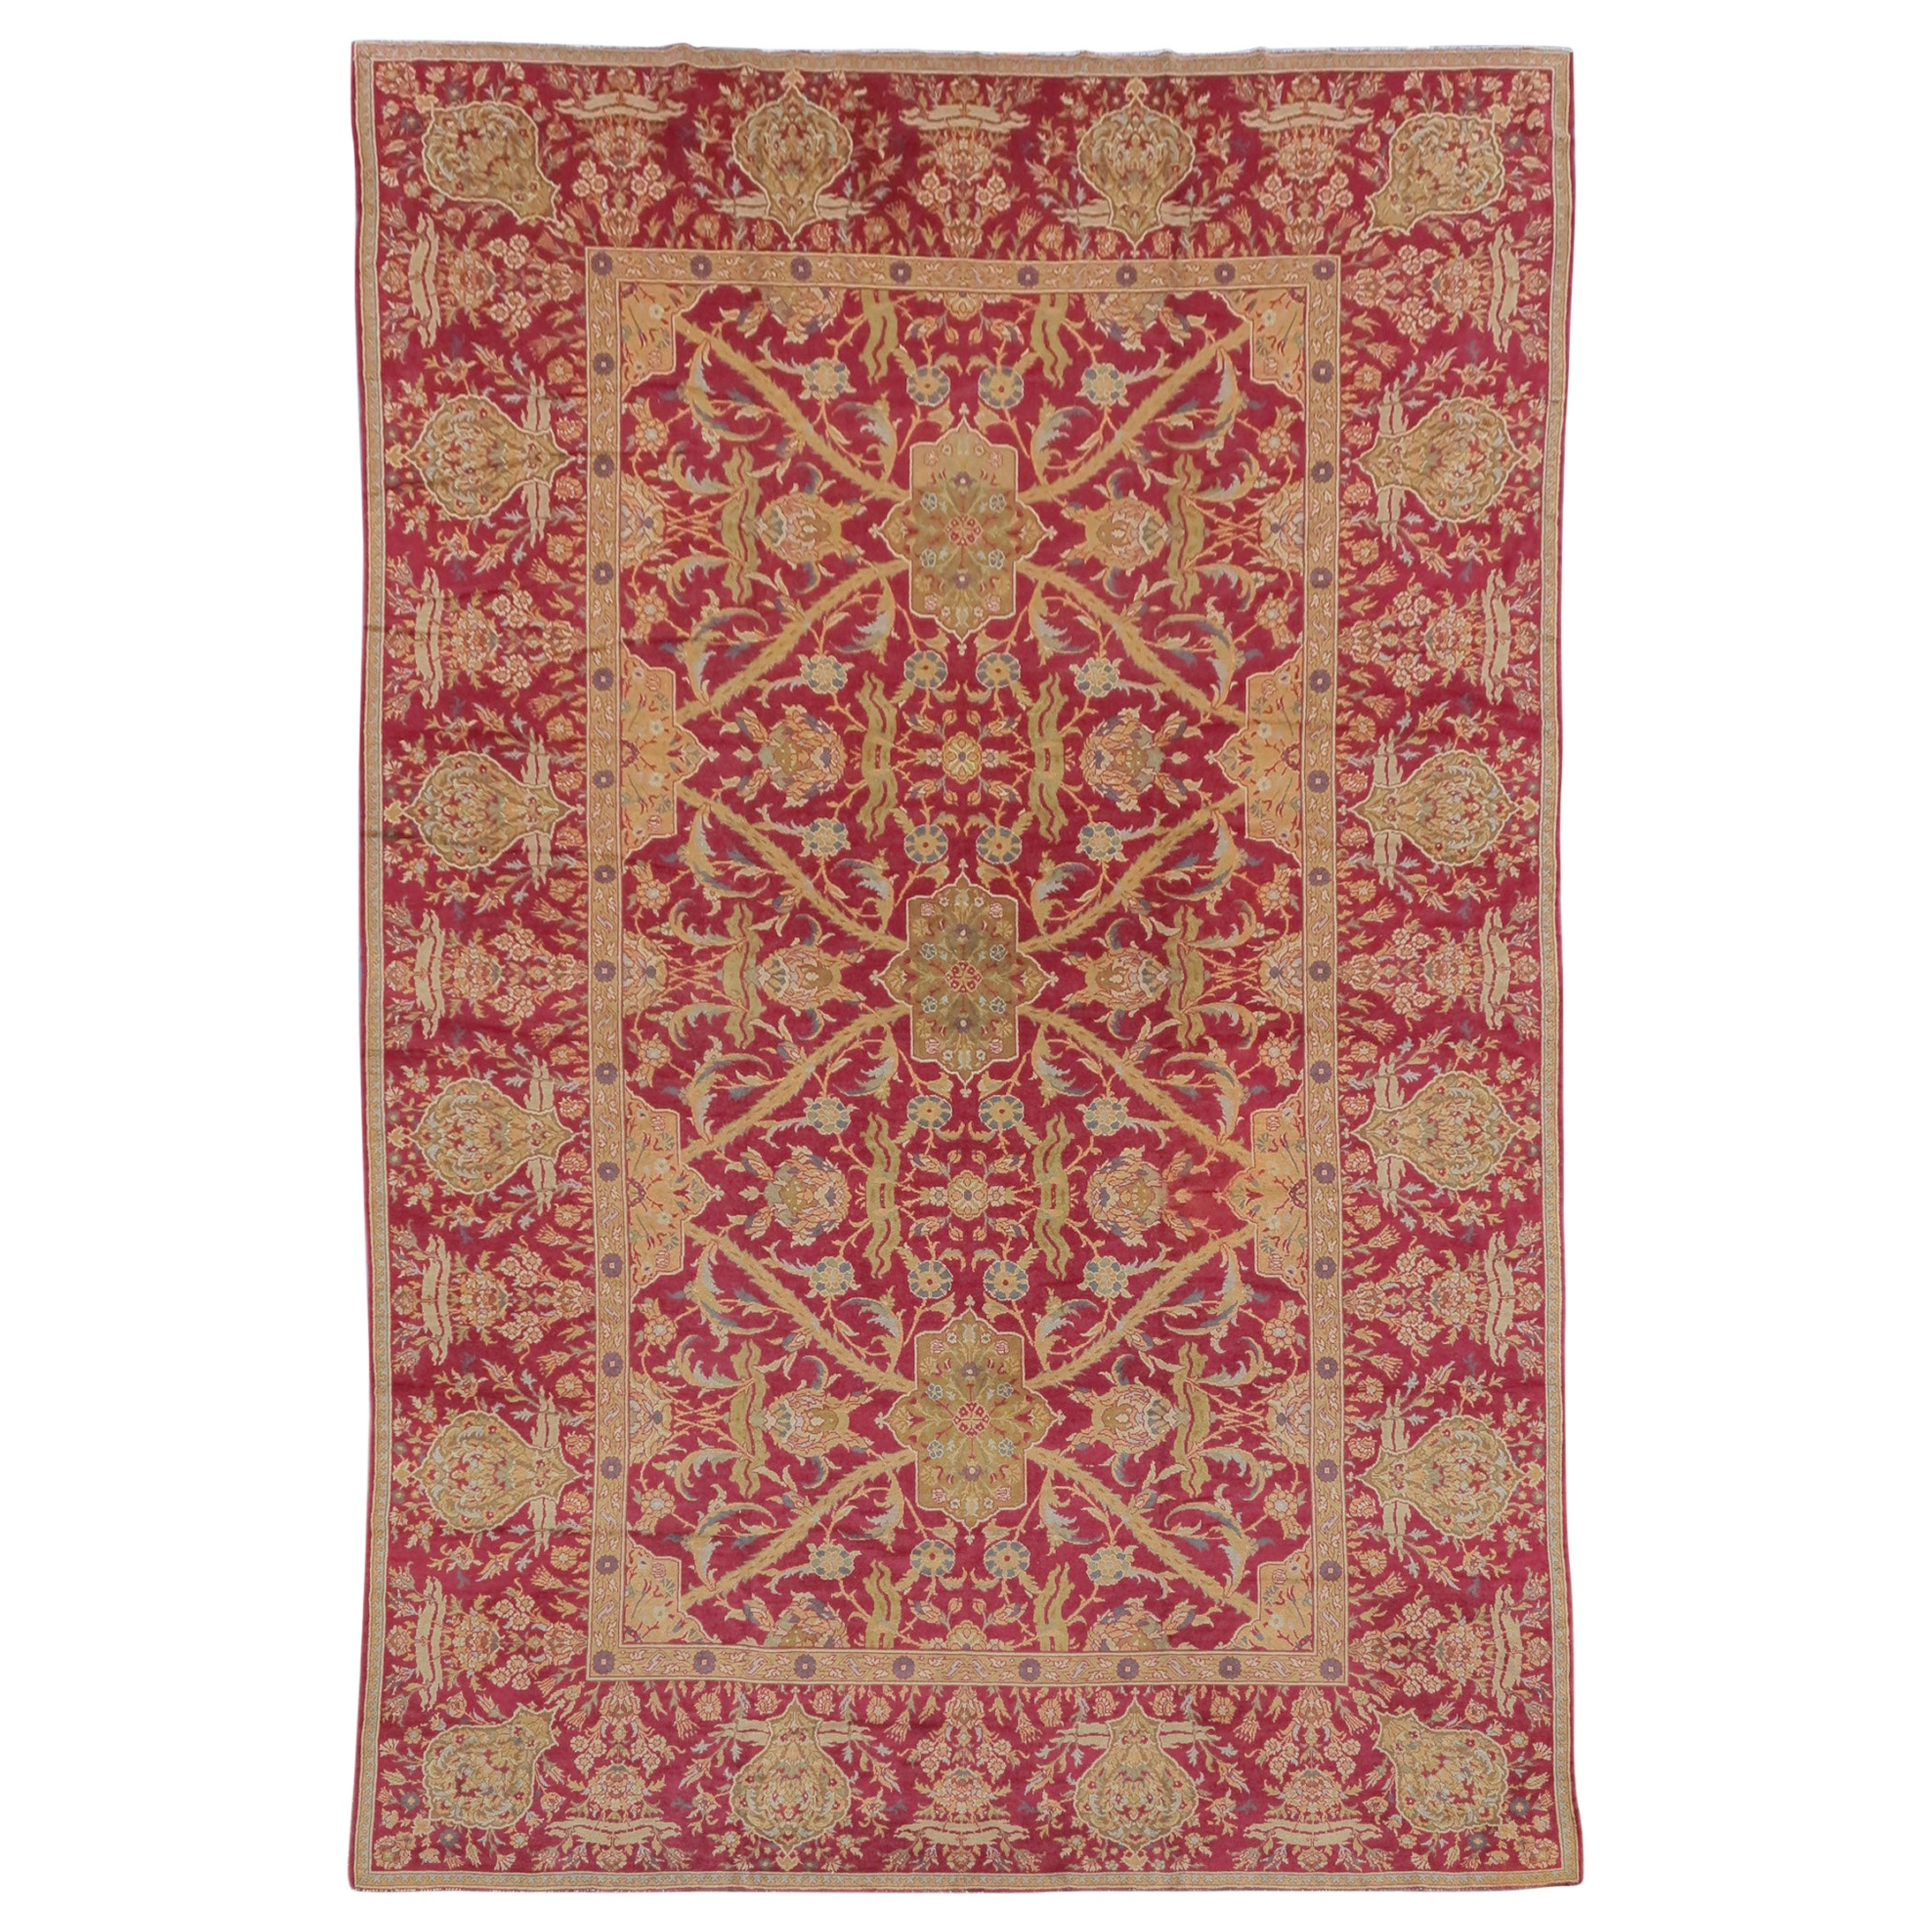 Antique Ottoman-Style Carpet, Late 19th Century For Sale